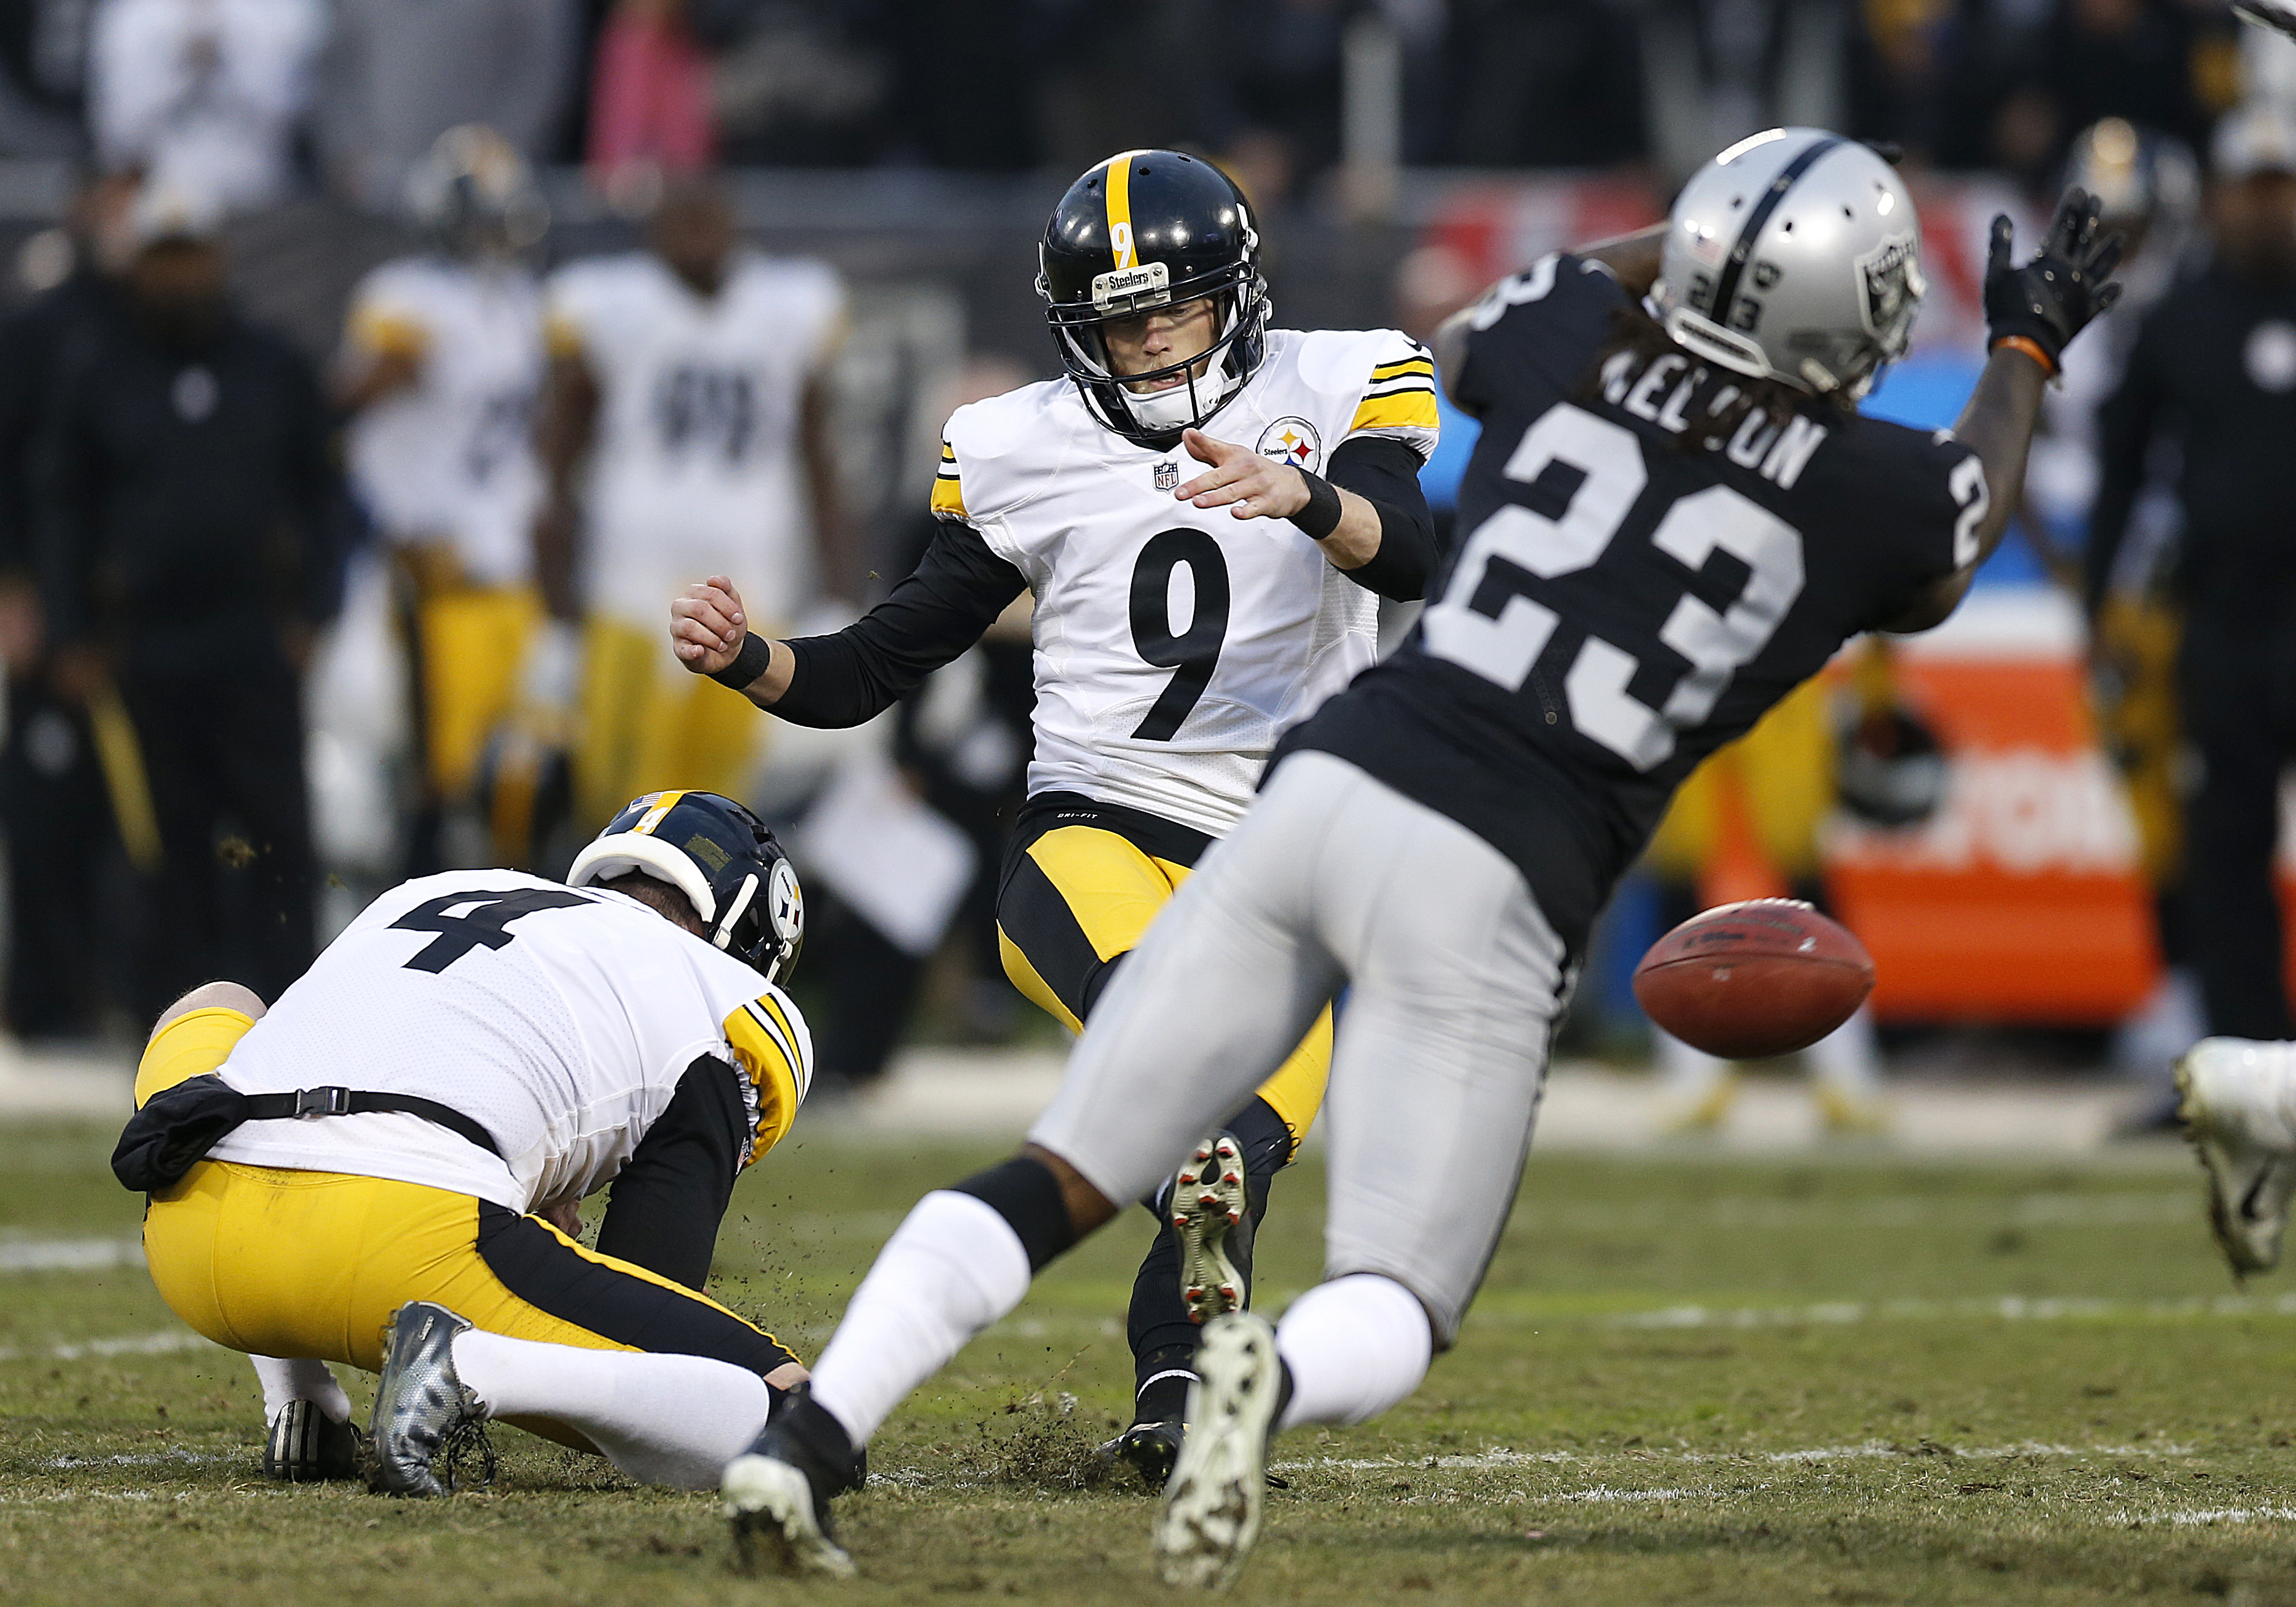 Steelers' playoff hopes iffy after pratfall in Oakland